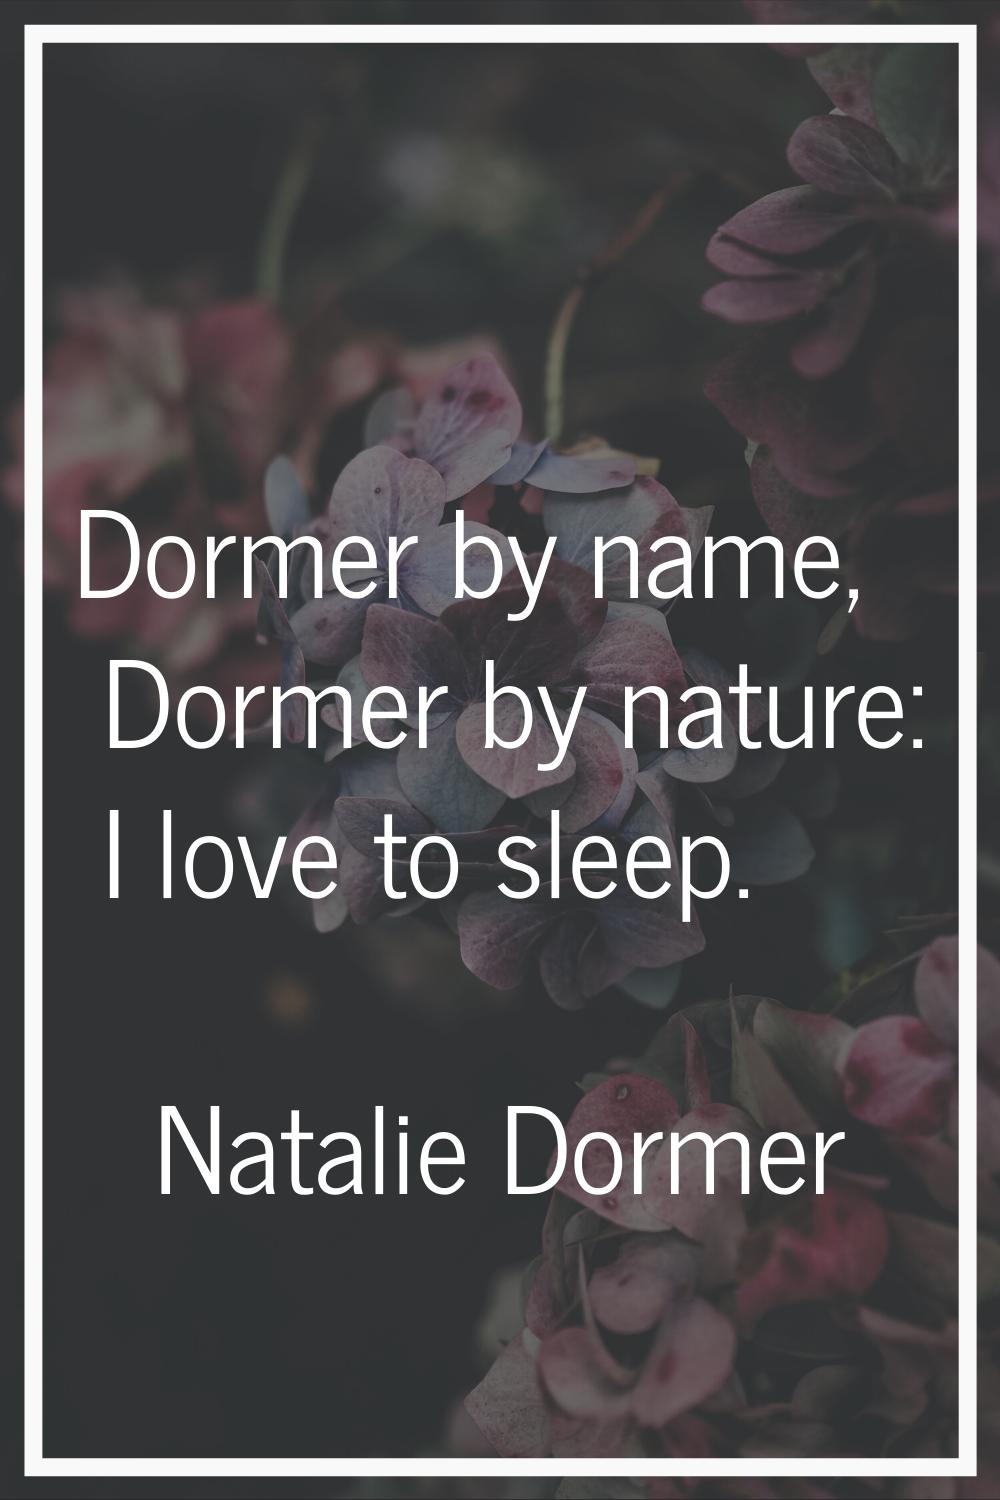 Dormer by name, Dormer by nature: I love to sleep.